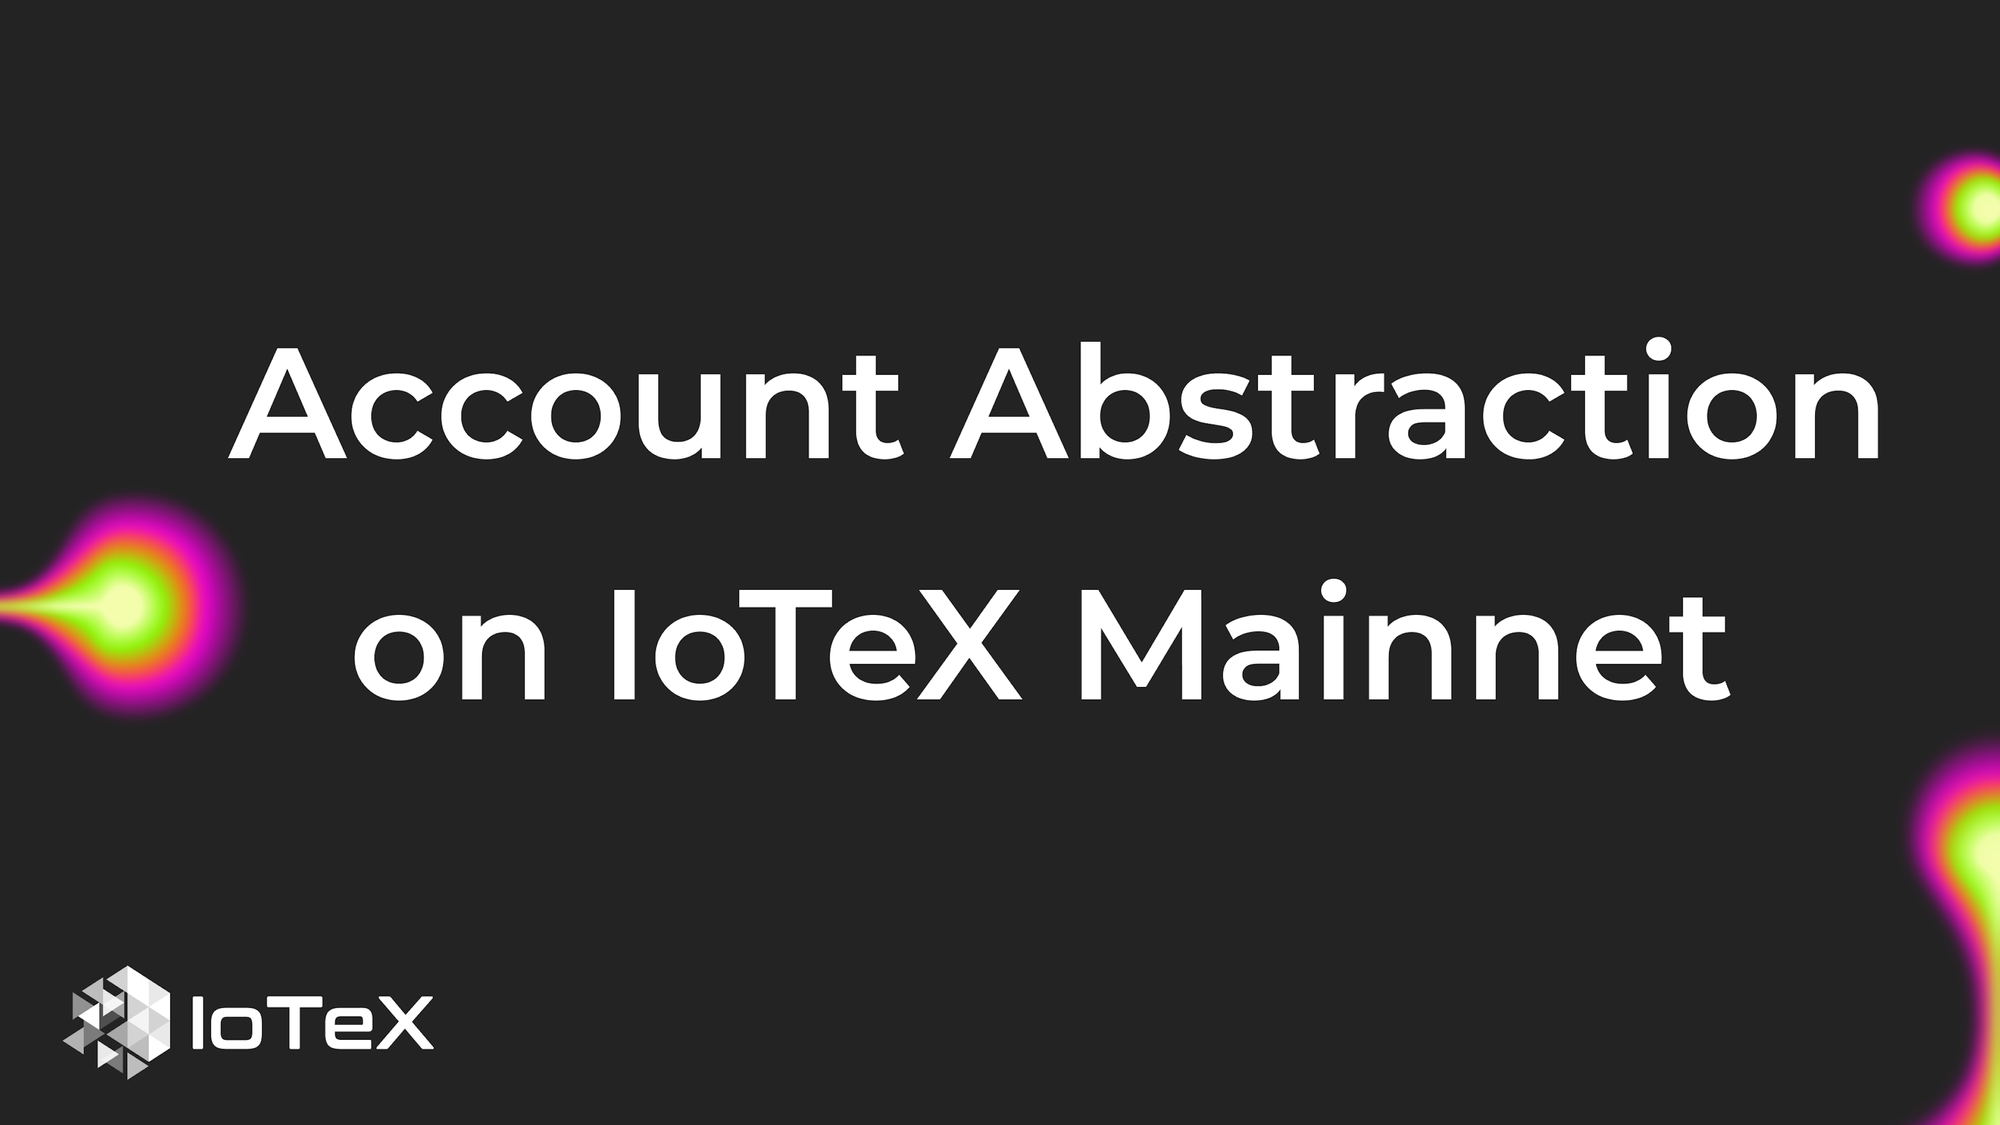 The Essential Guide to Account Abstraction on IoTeX: A Practical Guide to p256 Signatures